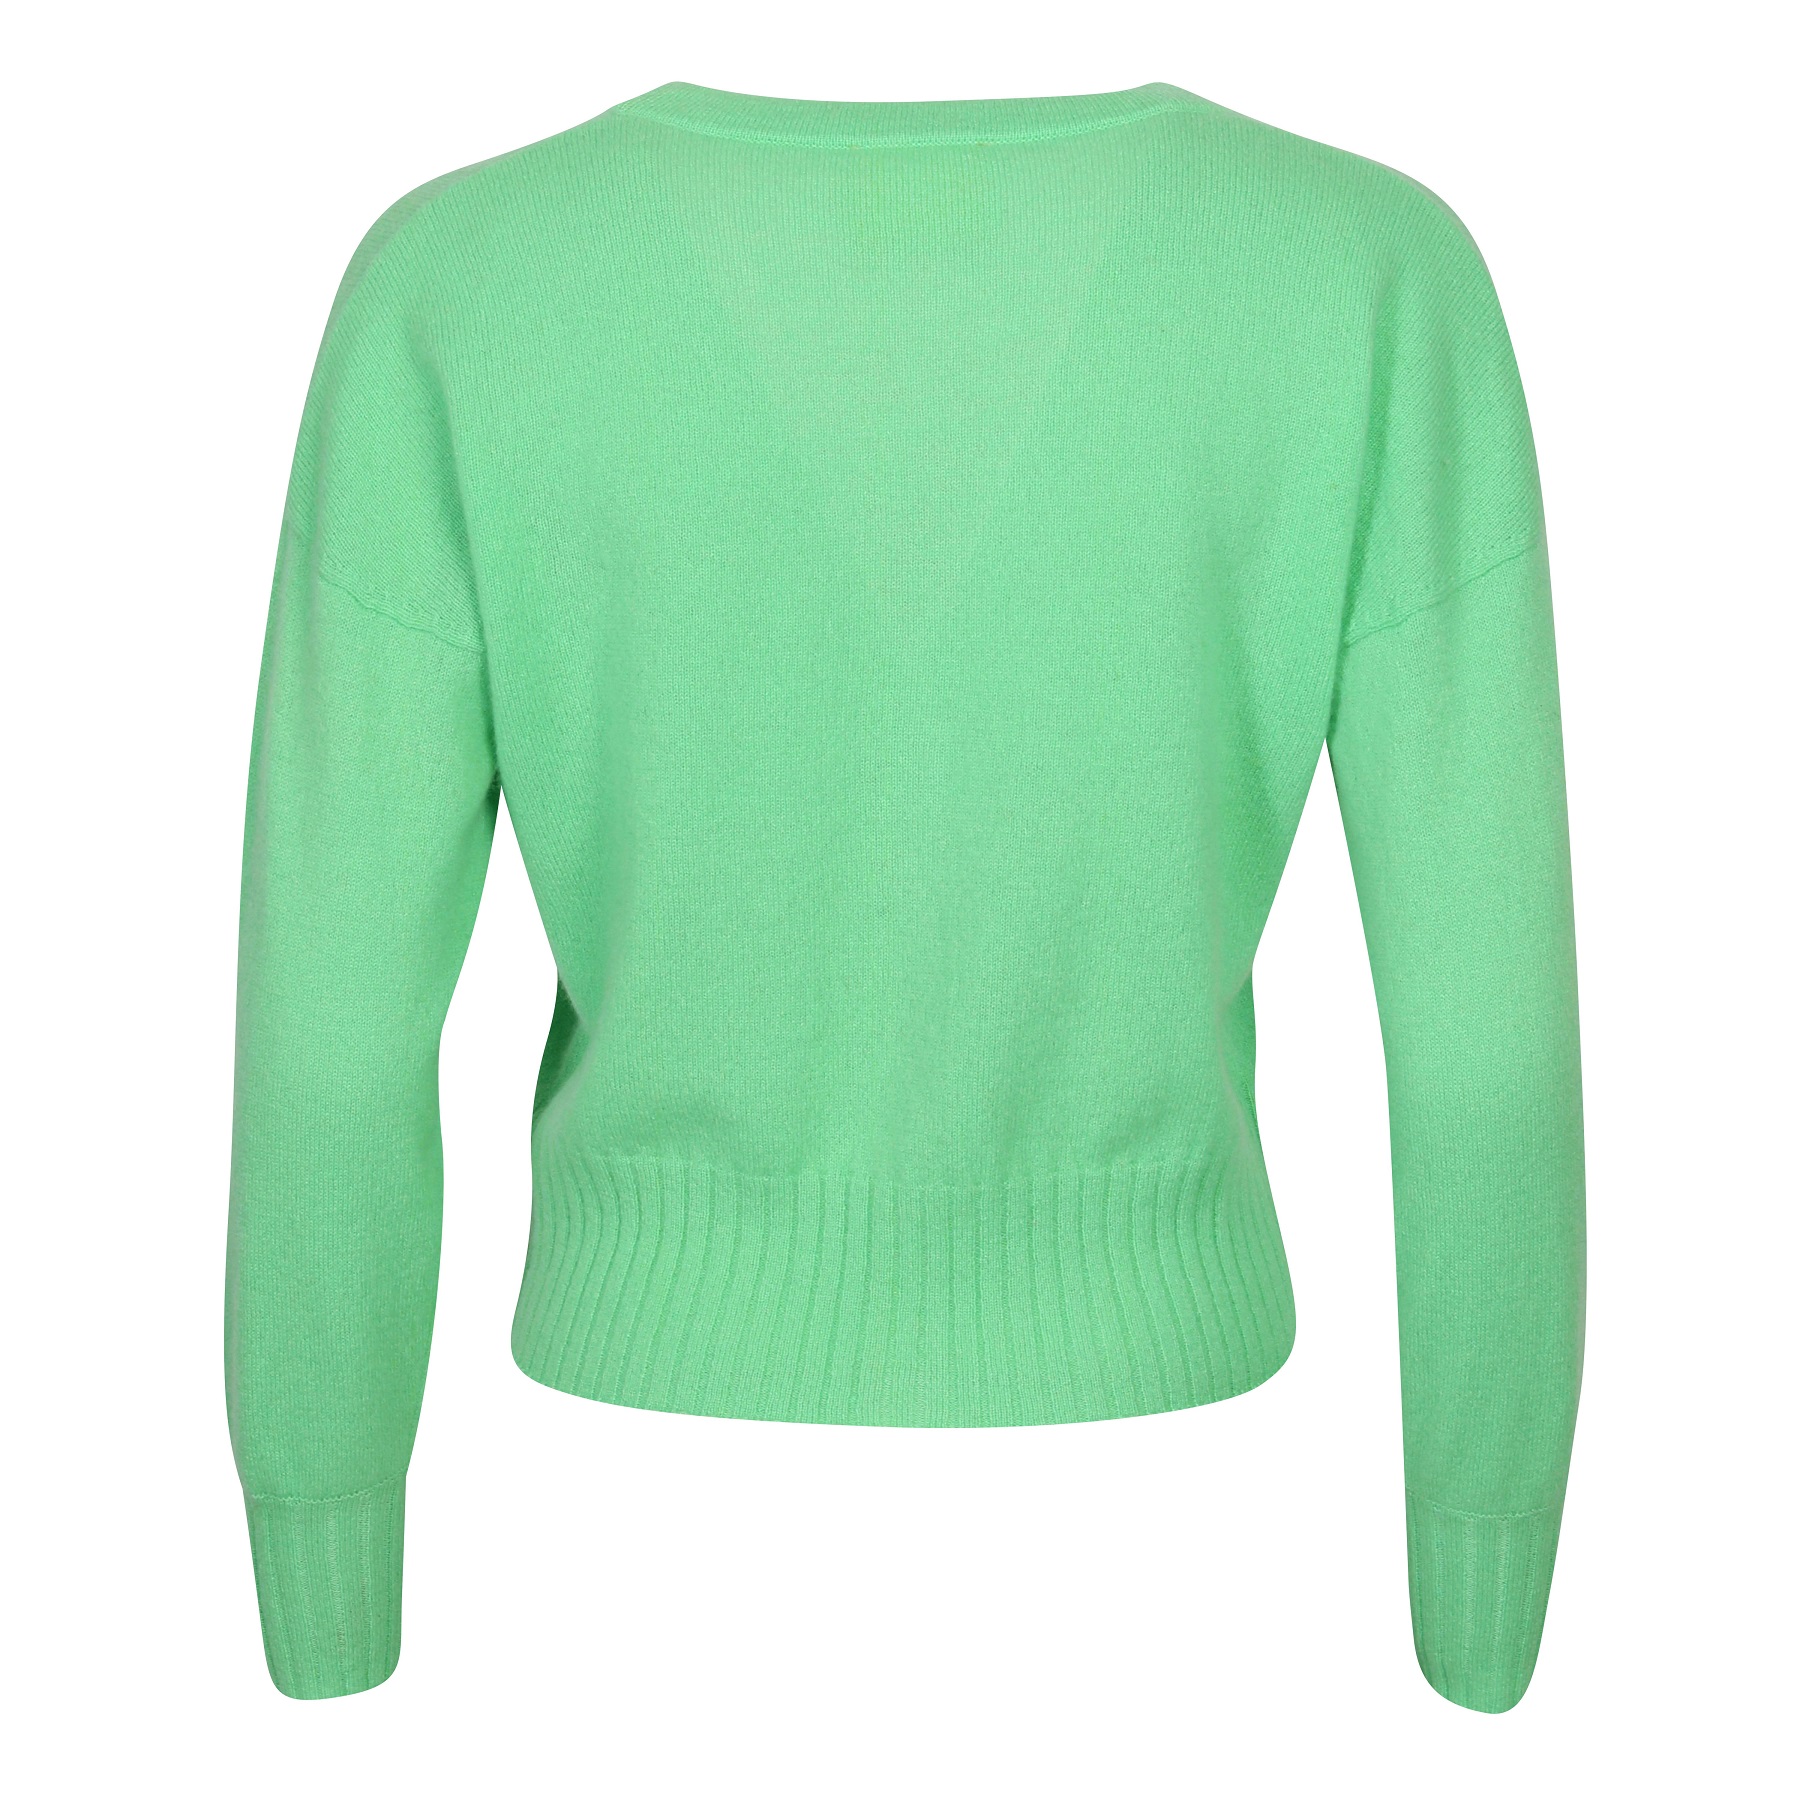 Absolut Cashmere Cardigan in Light Green S